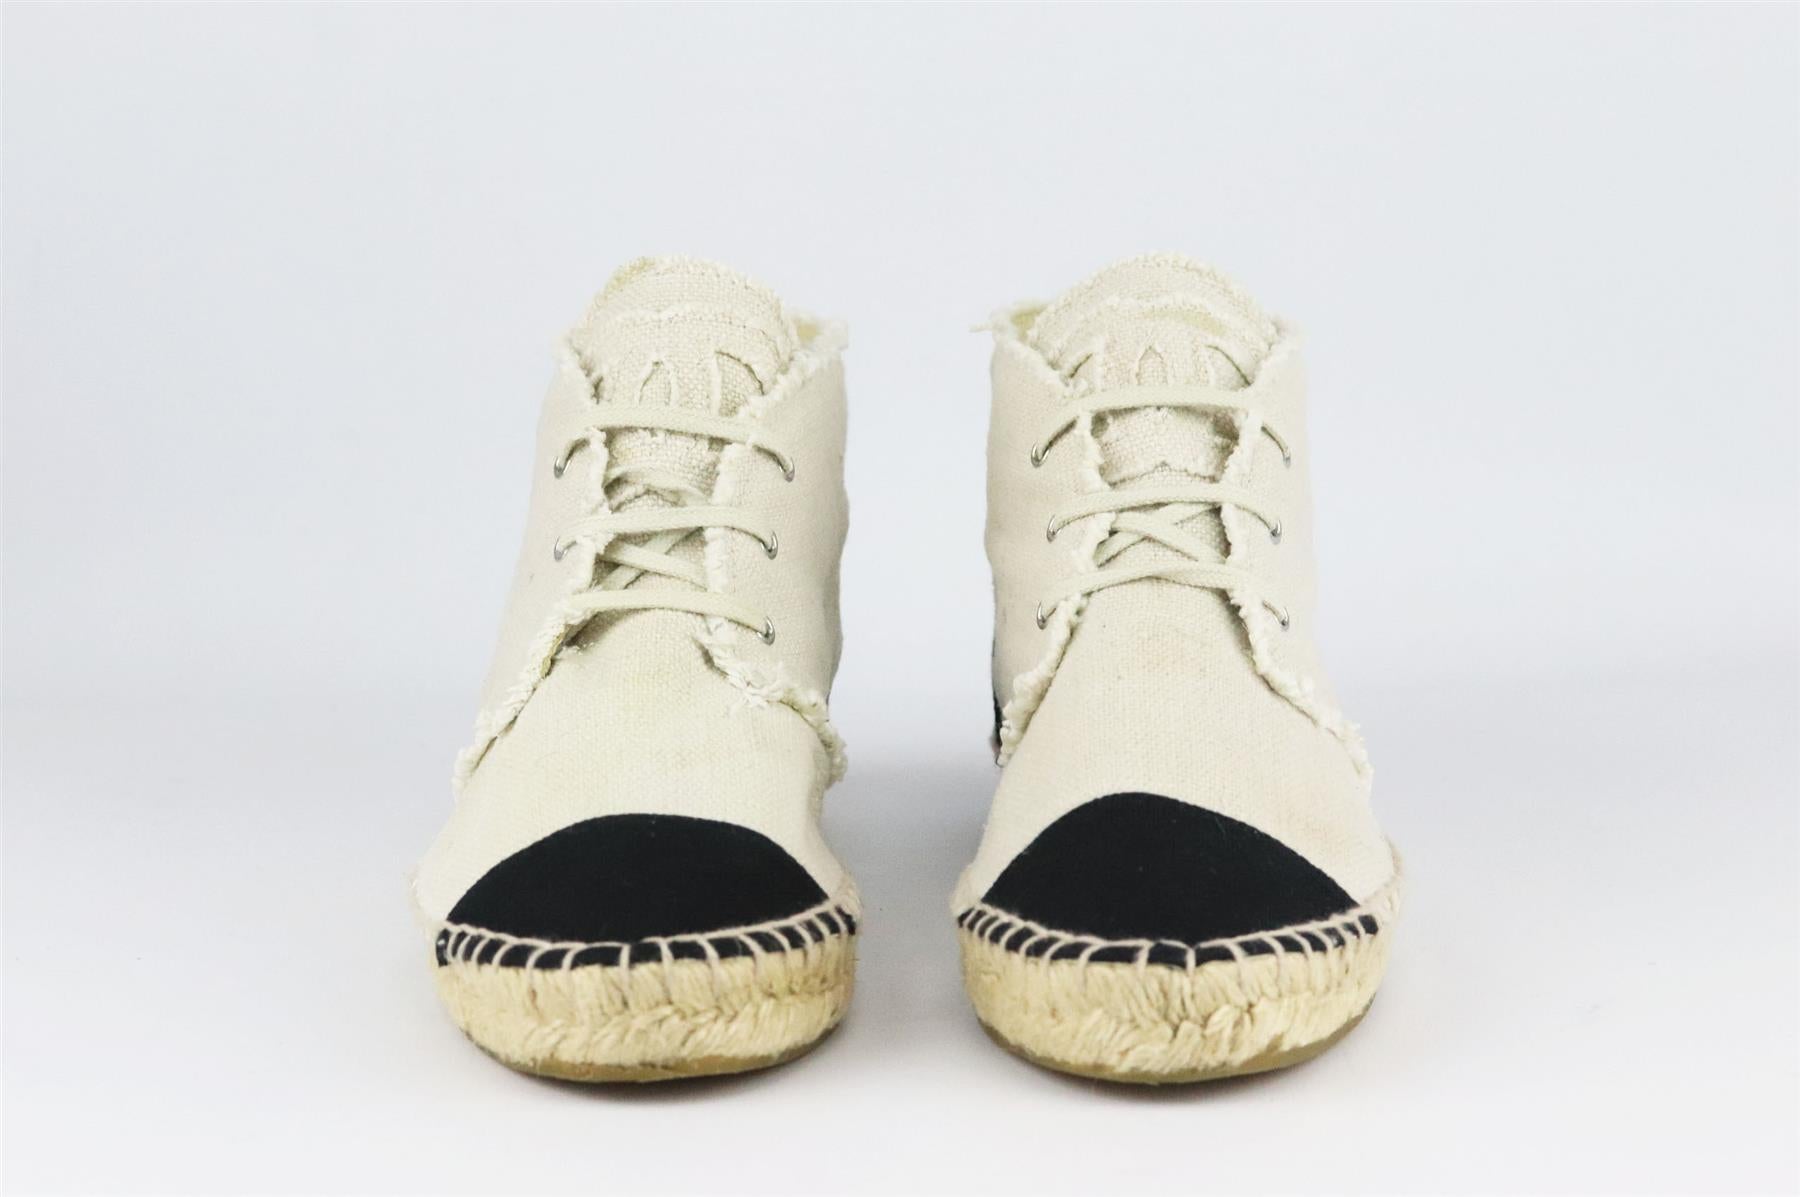 Chanel's lace-up espadrilles in cream linen, featuring the brand's trademark interlocking CC logo on the tongue in a matching frayed cream linen, they have a thick jute sole and a reinforced canvas toe which offers a comfortable and supportive fit.